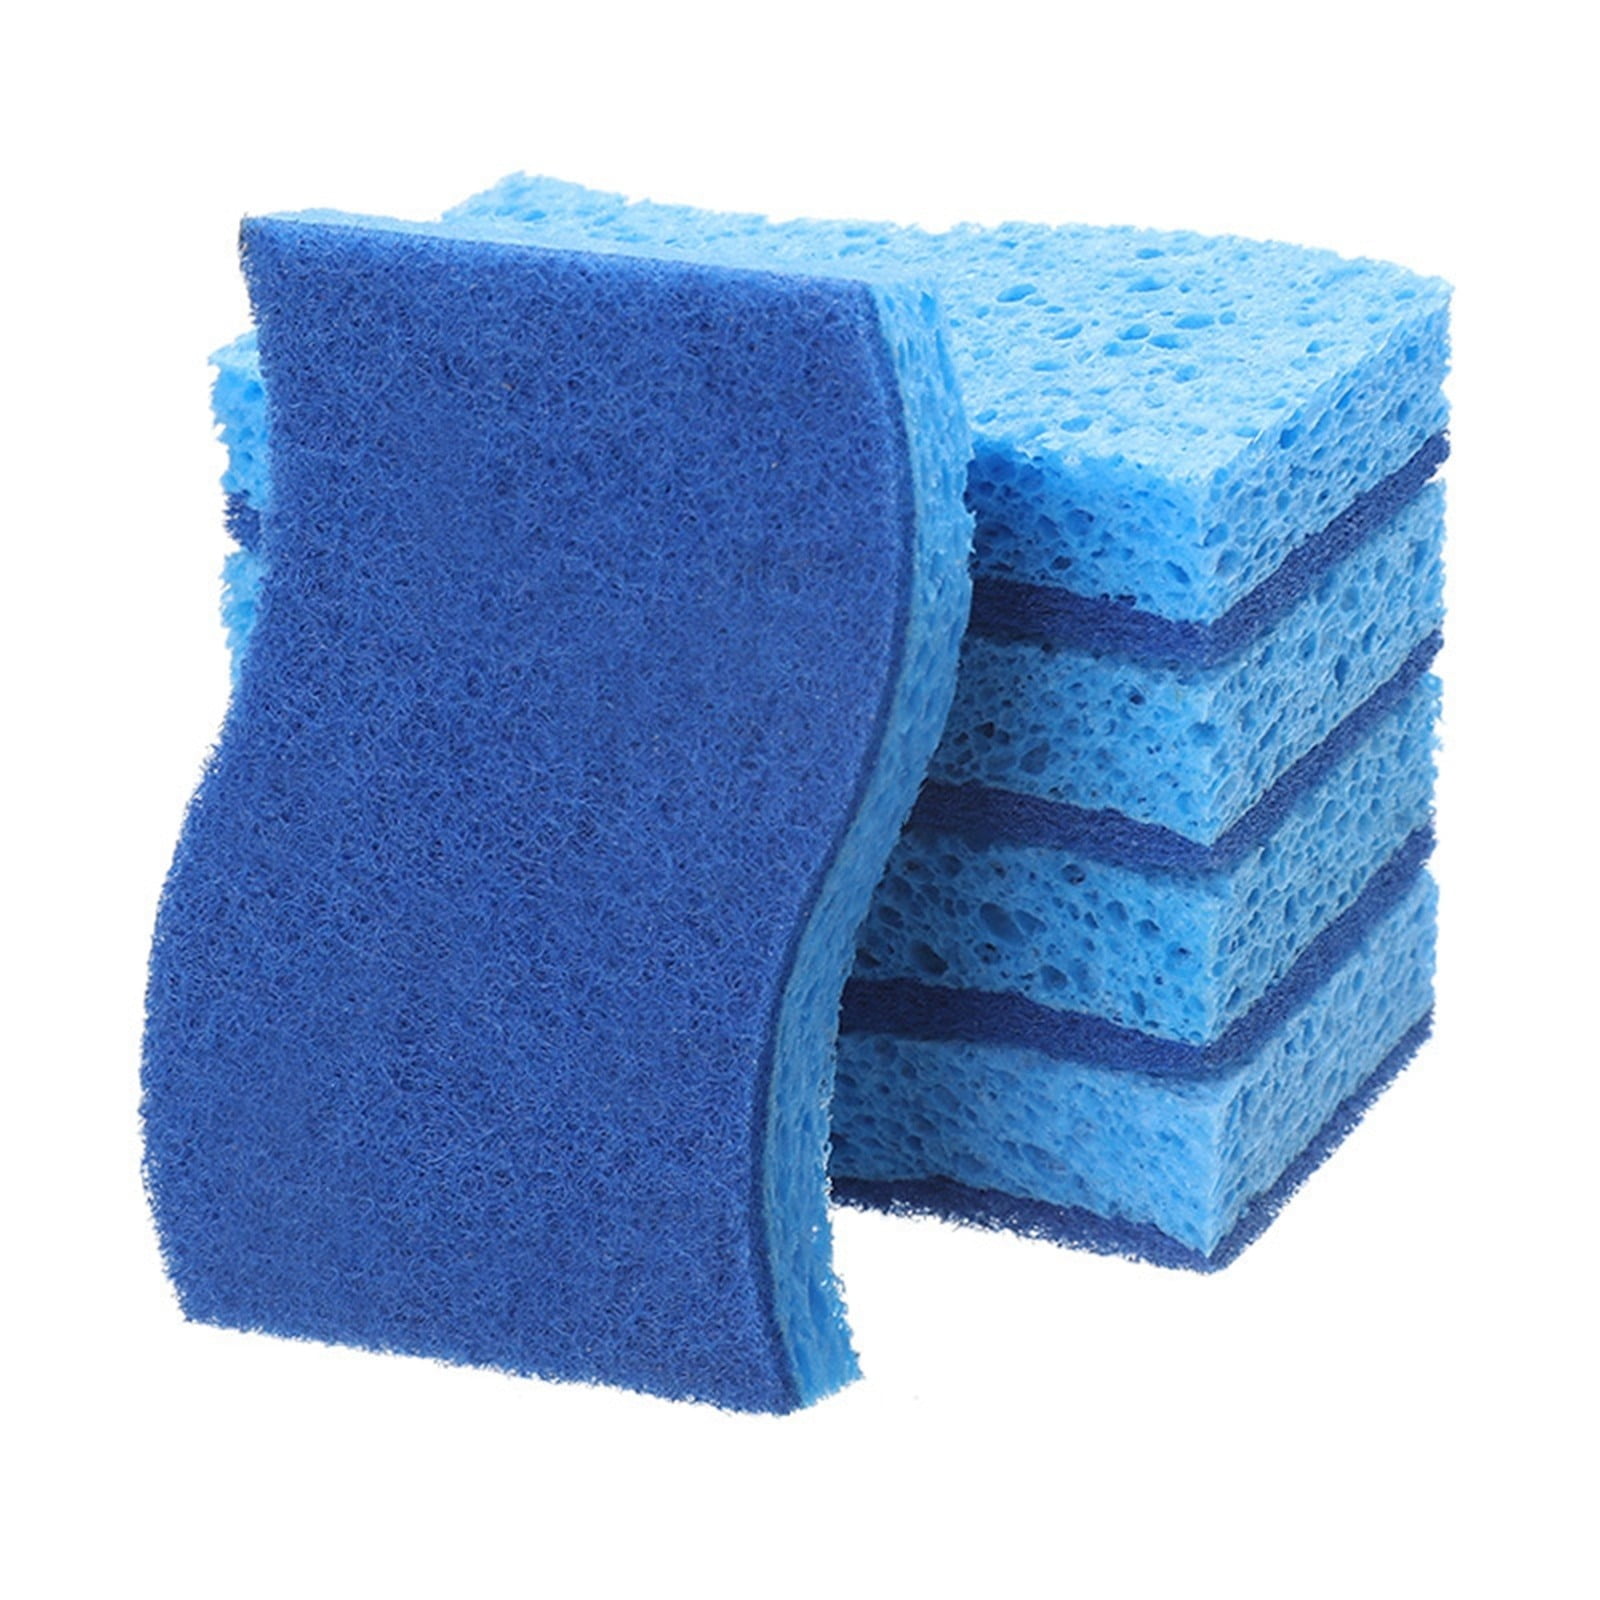 Oavqhlg3b Kitchen Cleaning Sponge,5 Pack Eco Non-Scratch for Dish,Scrub Sponge, Size: One Size